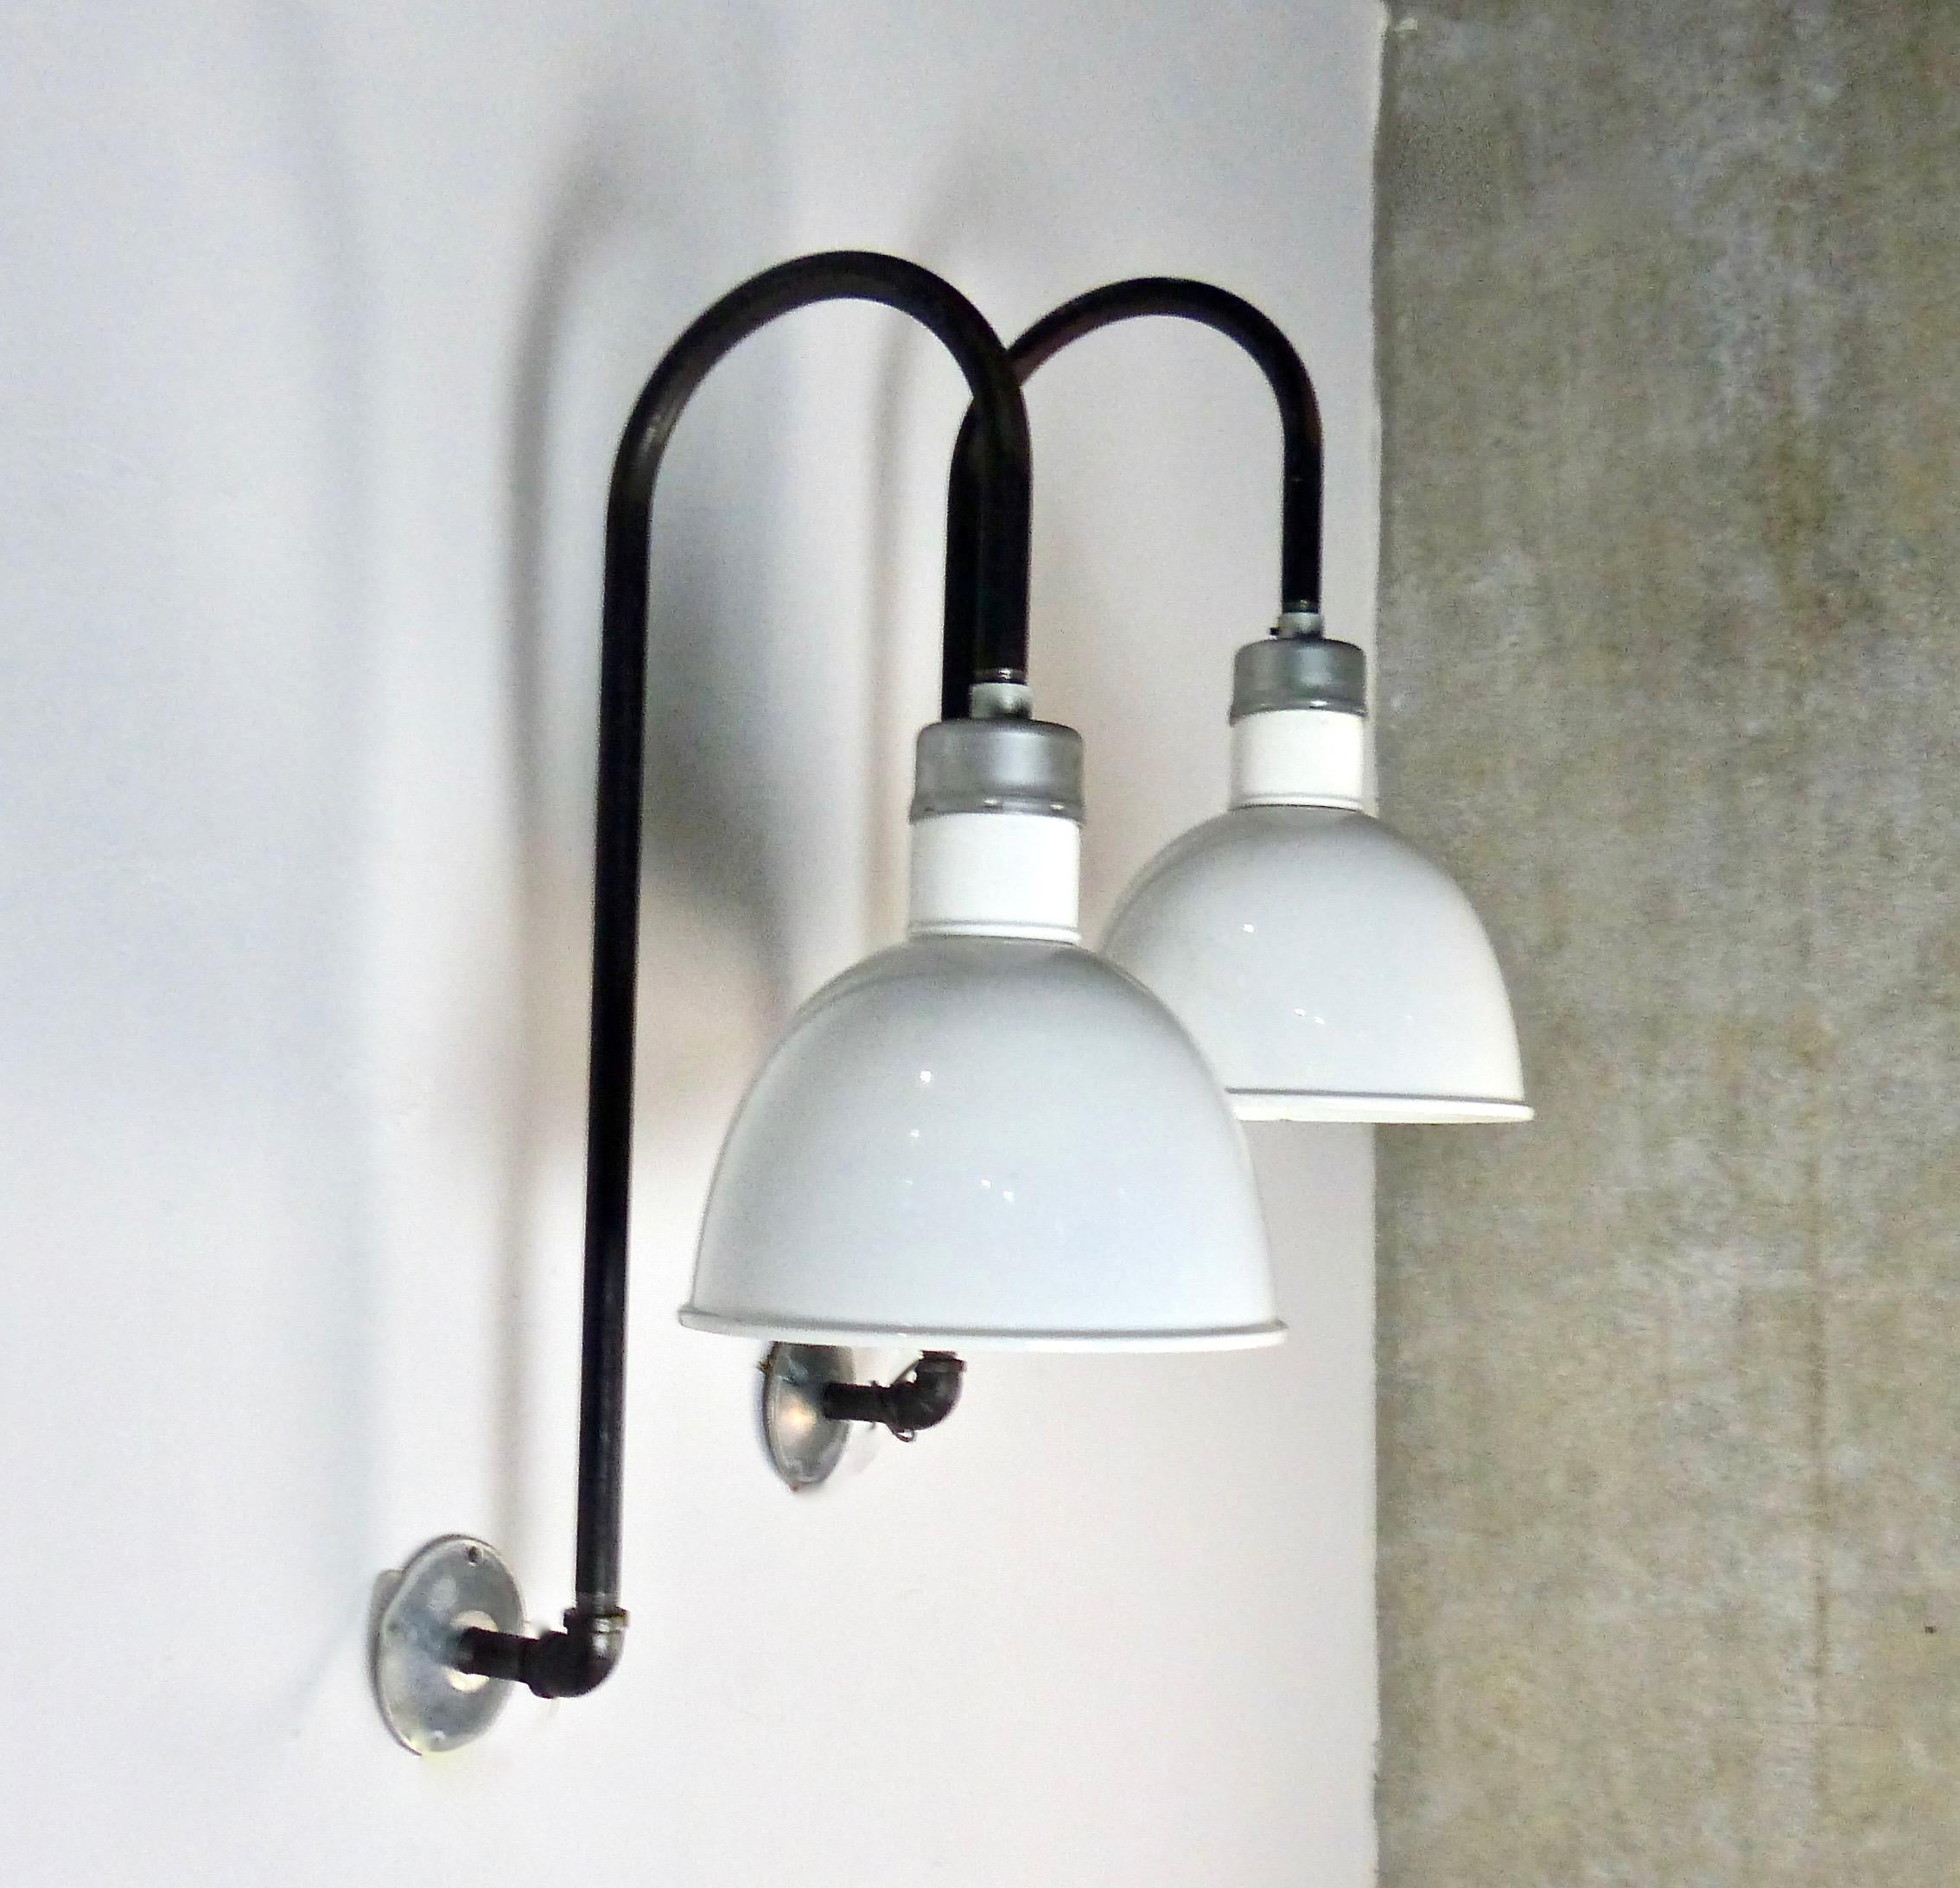 Matched pair of industrial wall sconces. White enamel shades mounted on pipe. Re-wired and CSA approved to current electrical standards. Nice size and character. Price per light.
Dimensions 28” H x 16” W x 16” D”.